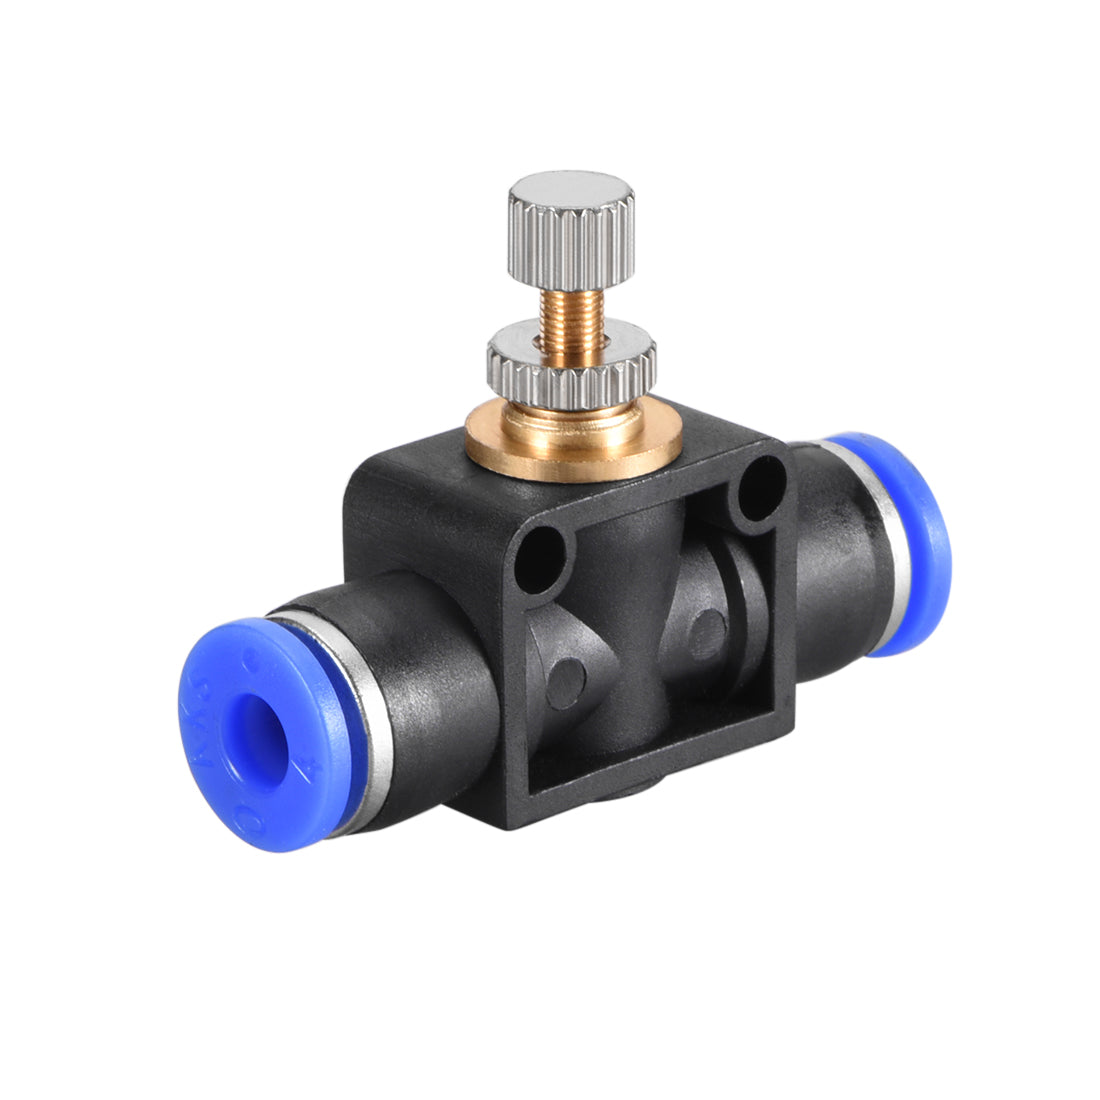 uxcell Uxcell 4mm OD Pneumatic Air Flow Control Valve,Flow In-Line Speed Controller Valve